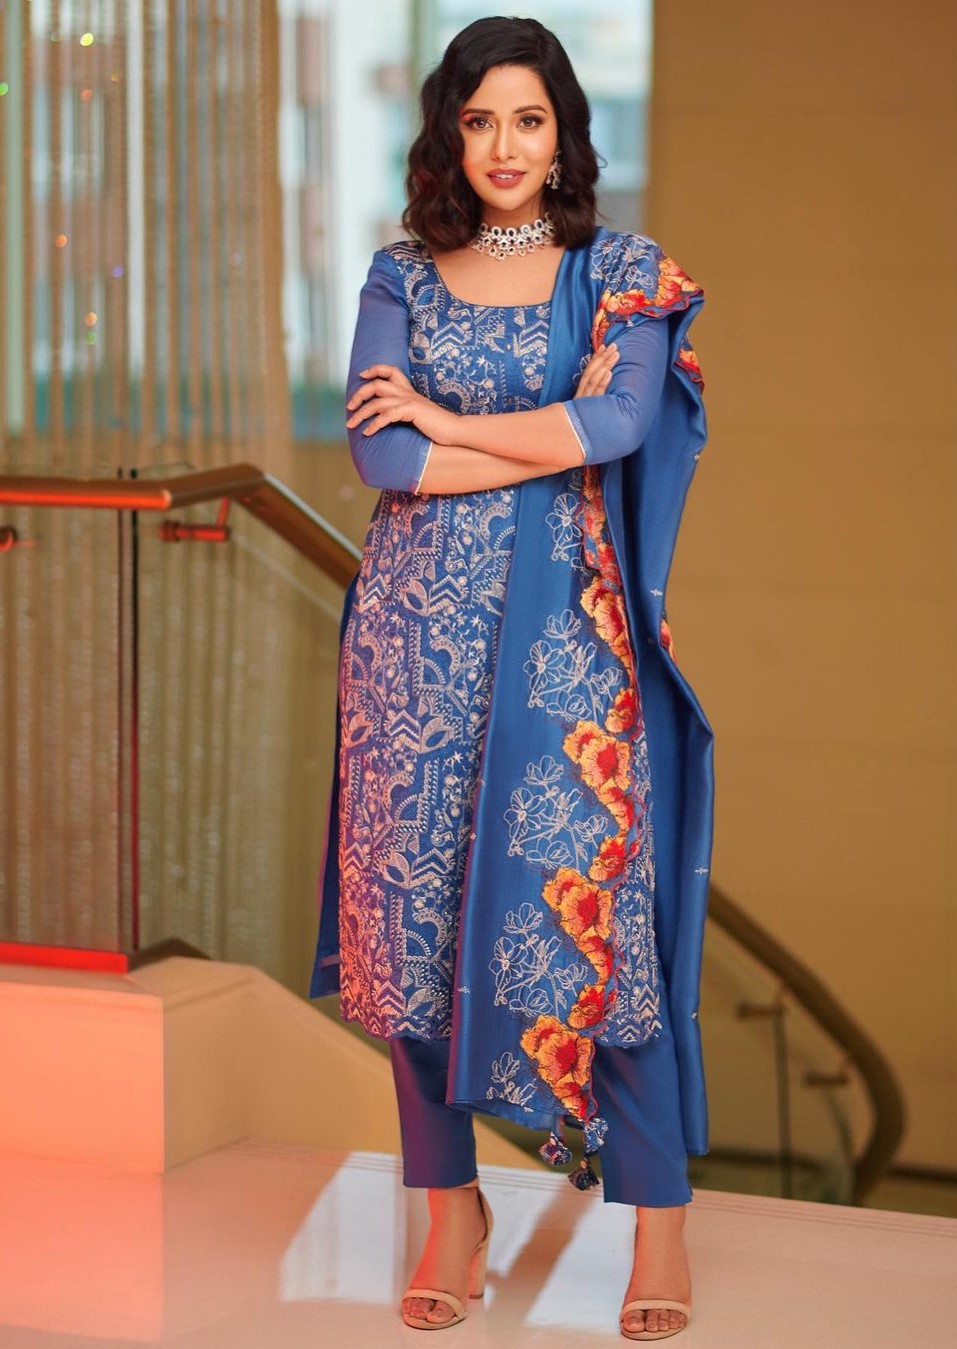 Raiza Wilson In Ethnical Blue Embroidered Suit Set Looks Festive Glamorous Outfits & Looks